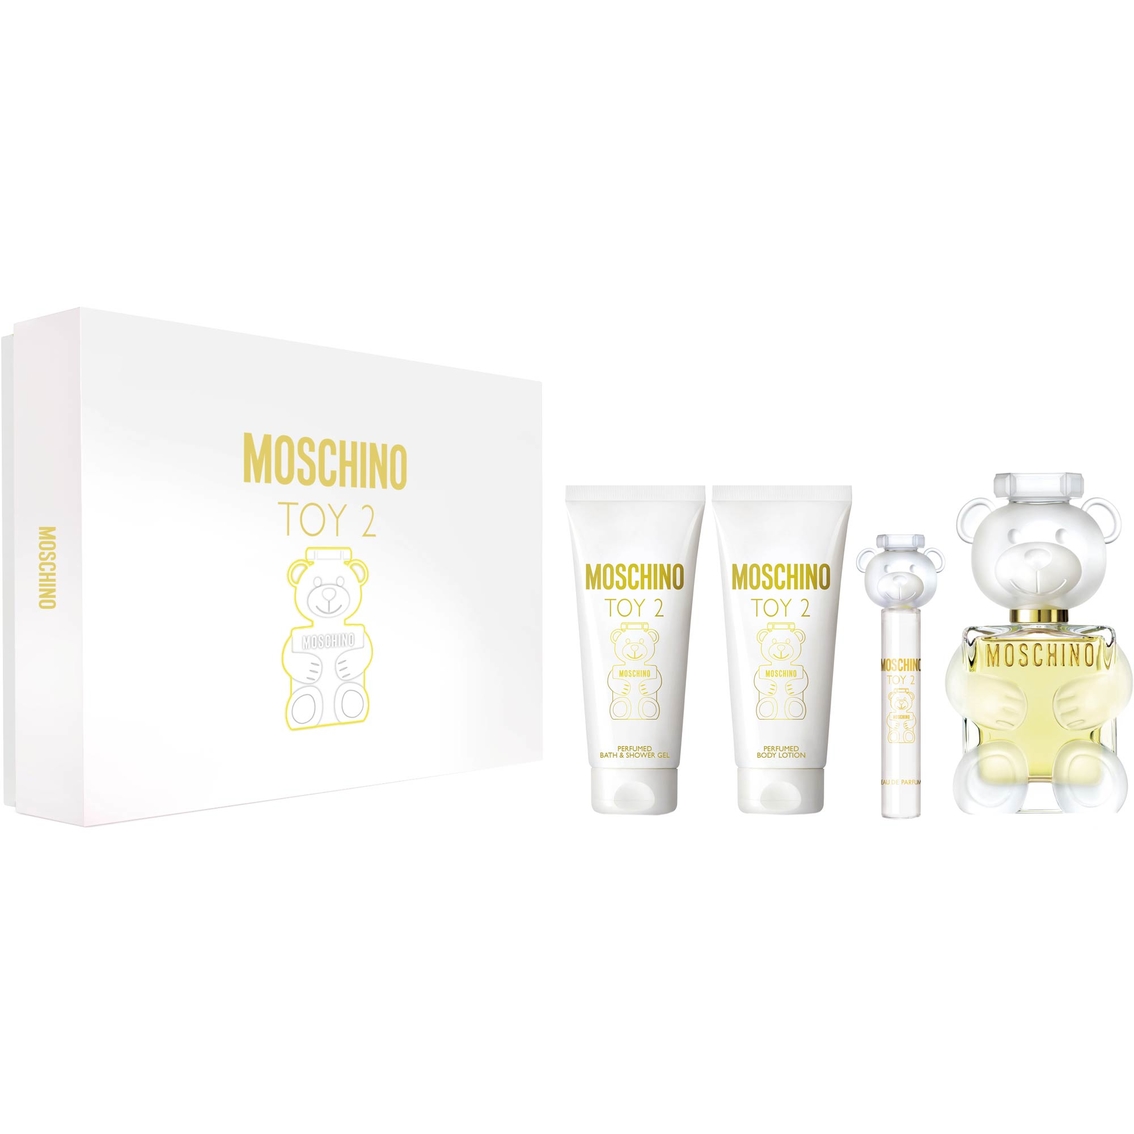 Moschino Toy 2 Gift 4 Pc. Set | Gift Sets | Beauty & Health | Shop The ...